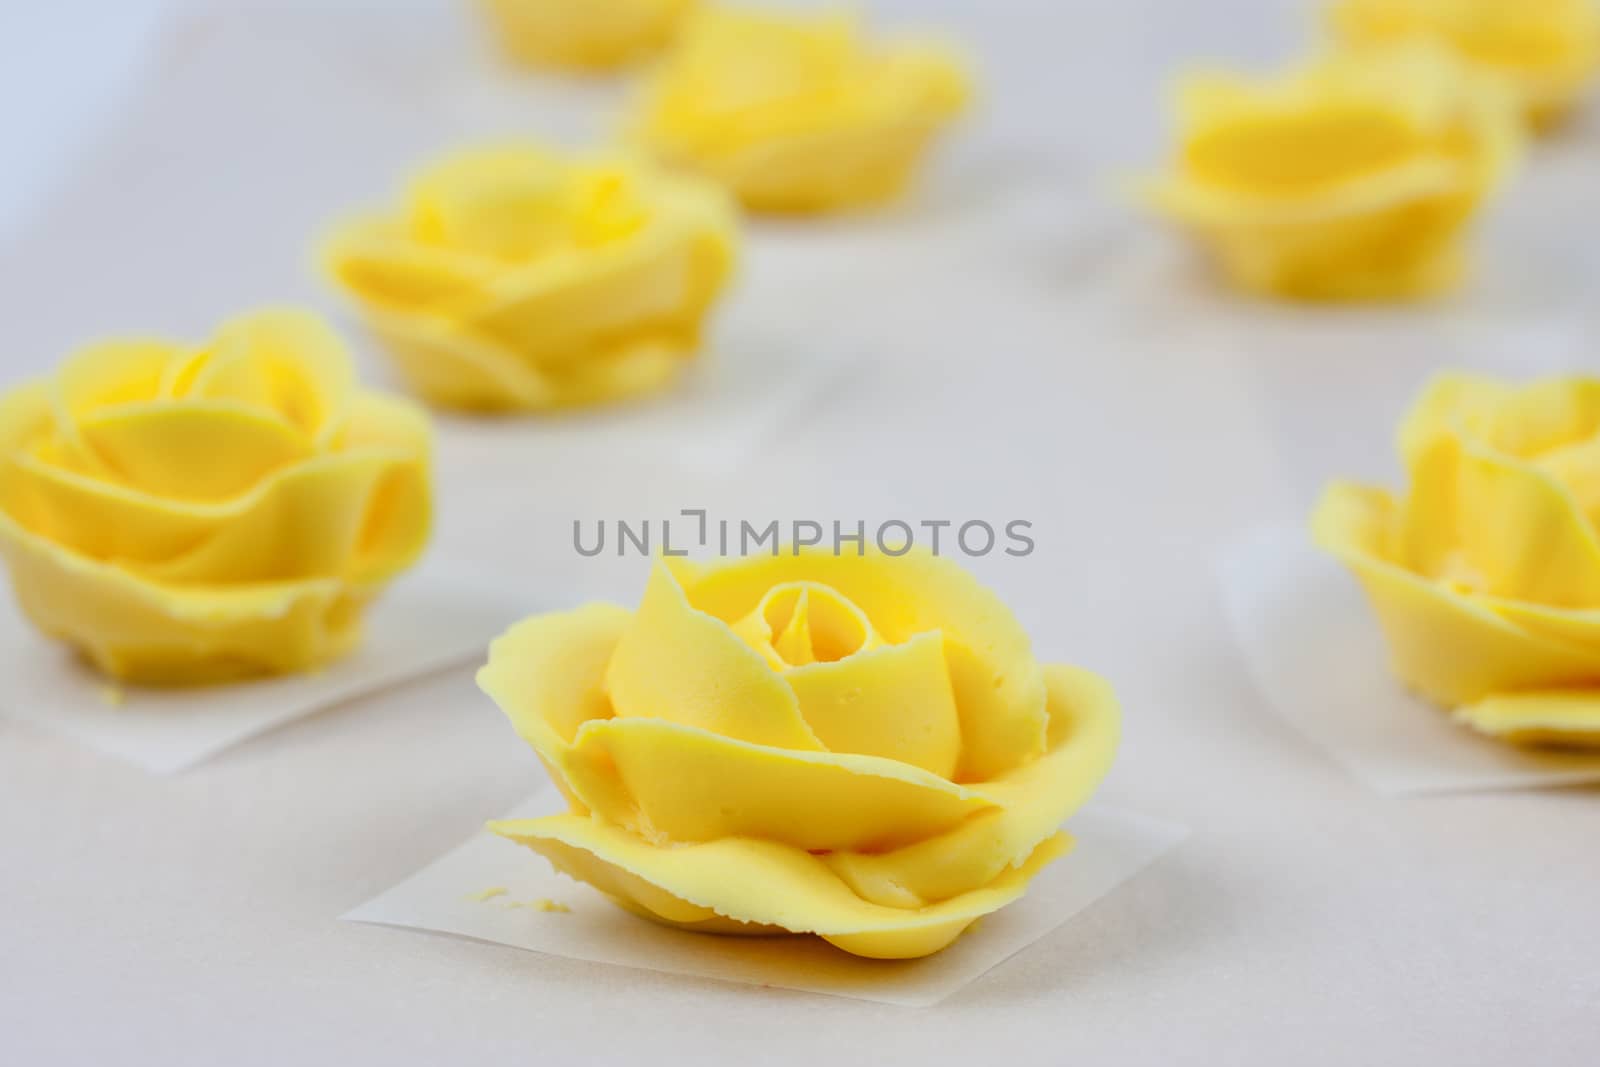 Yellow roses made from butter cream icing, drying on parchment paper.